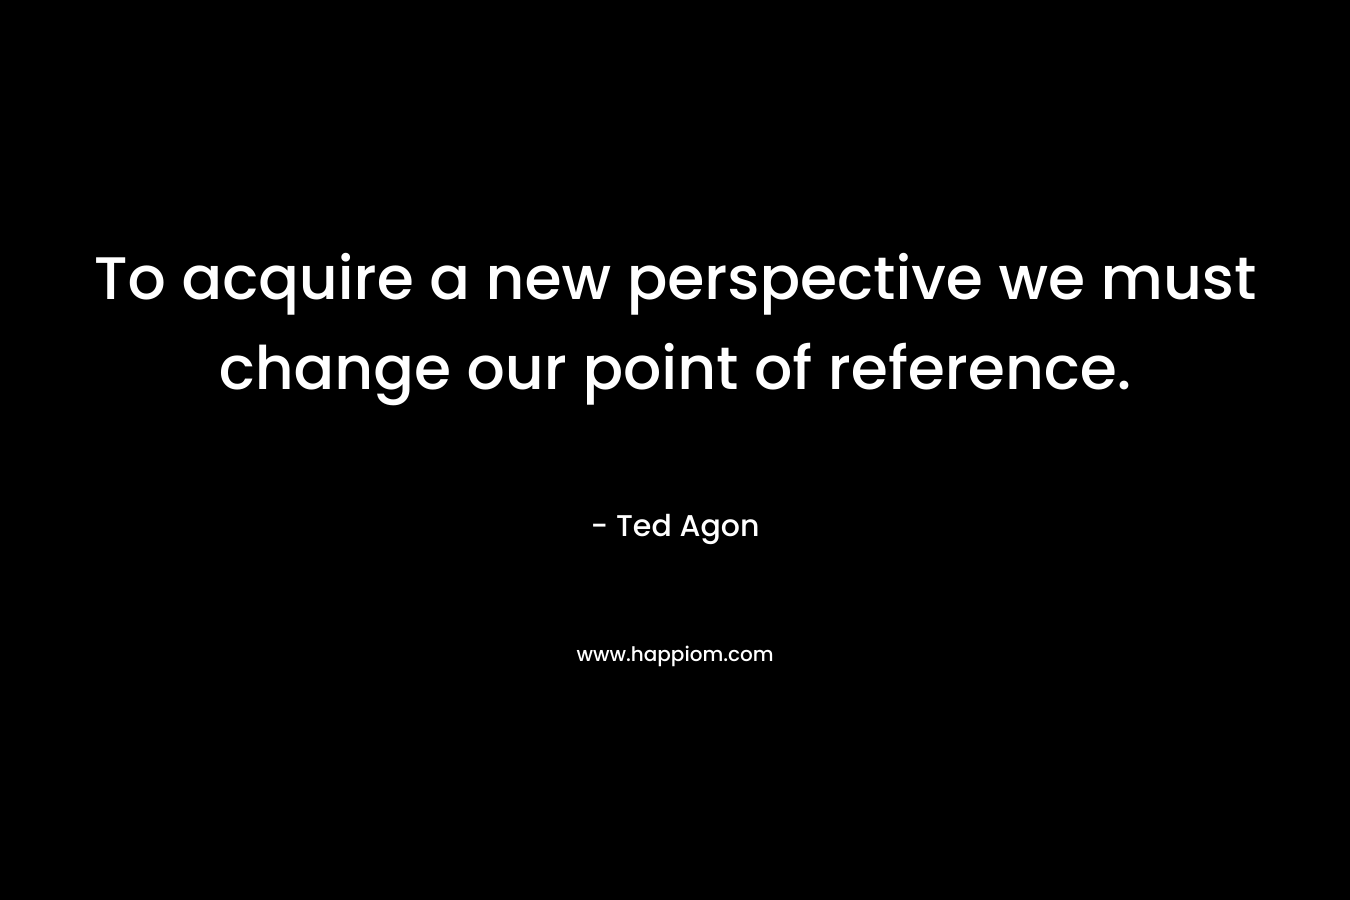 To acquire a new perspective we must change our point of reference.